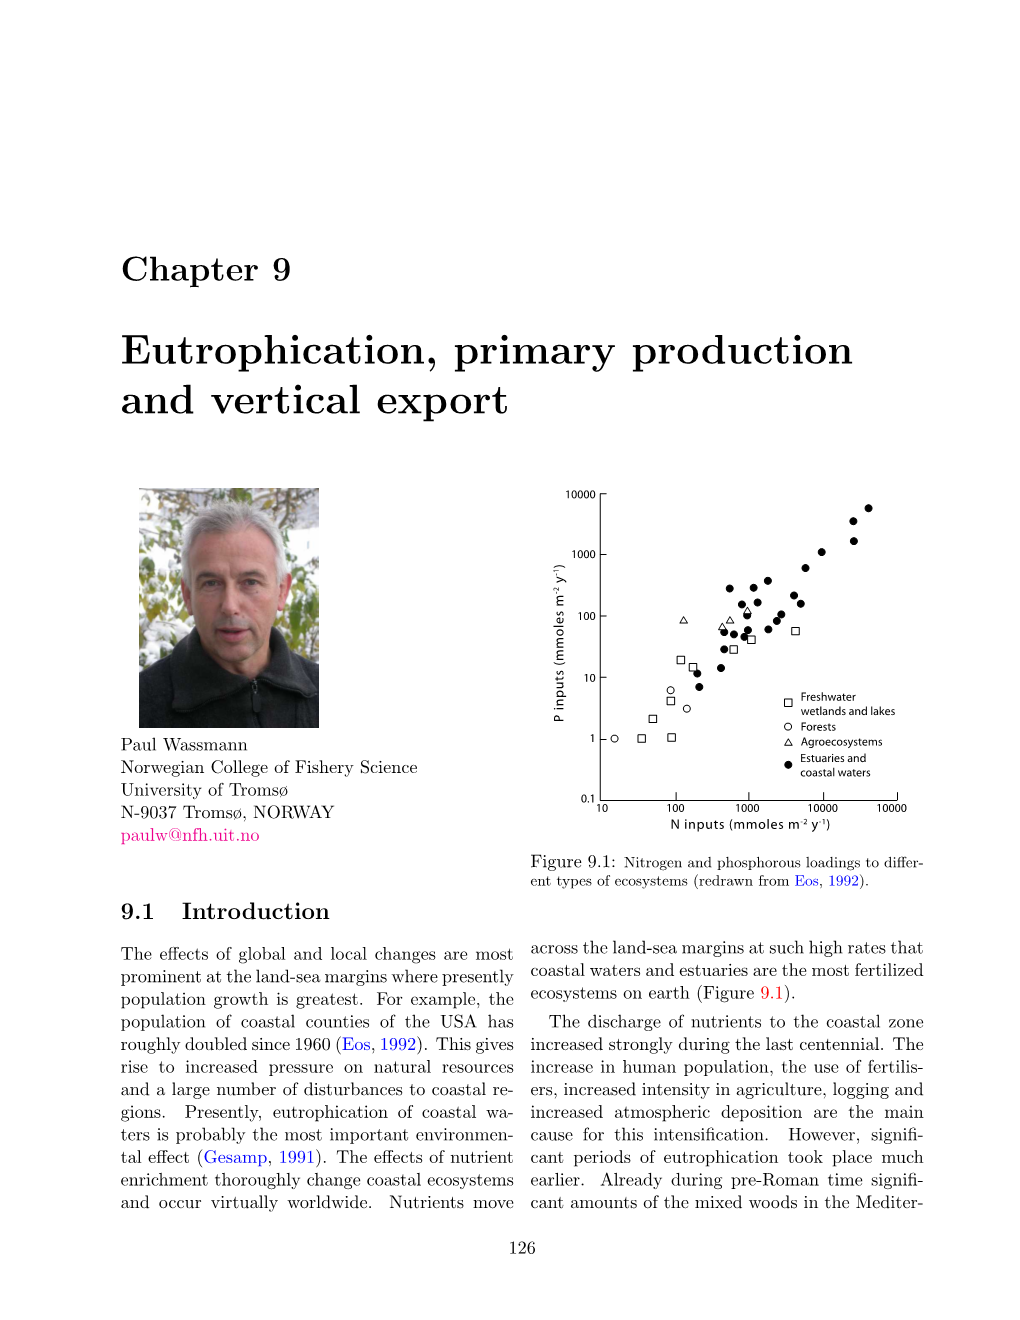 Eutrophication, Primary Production and Vertical Export